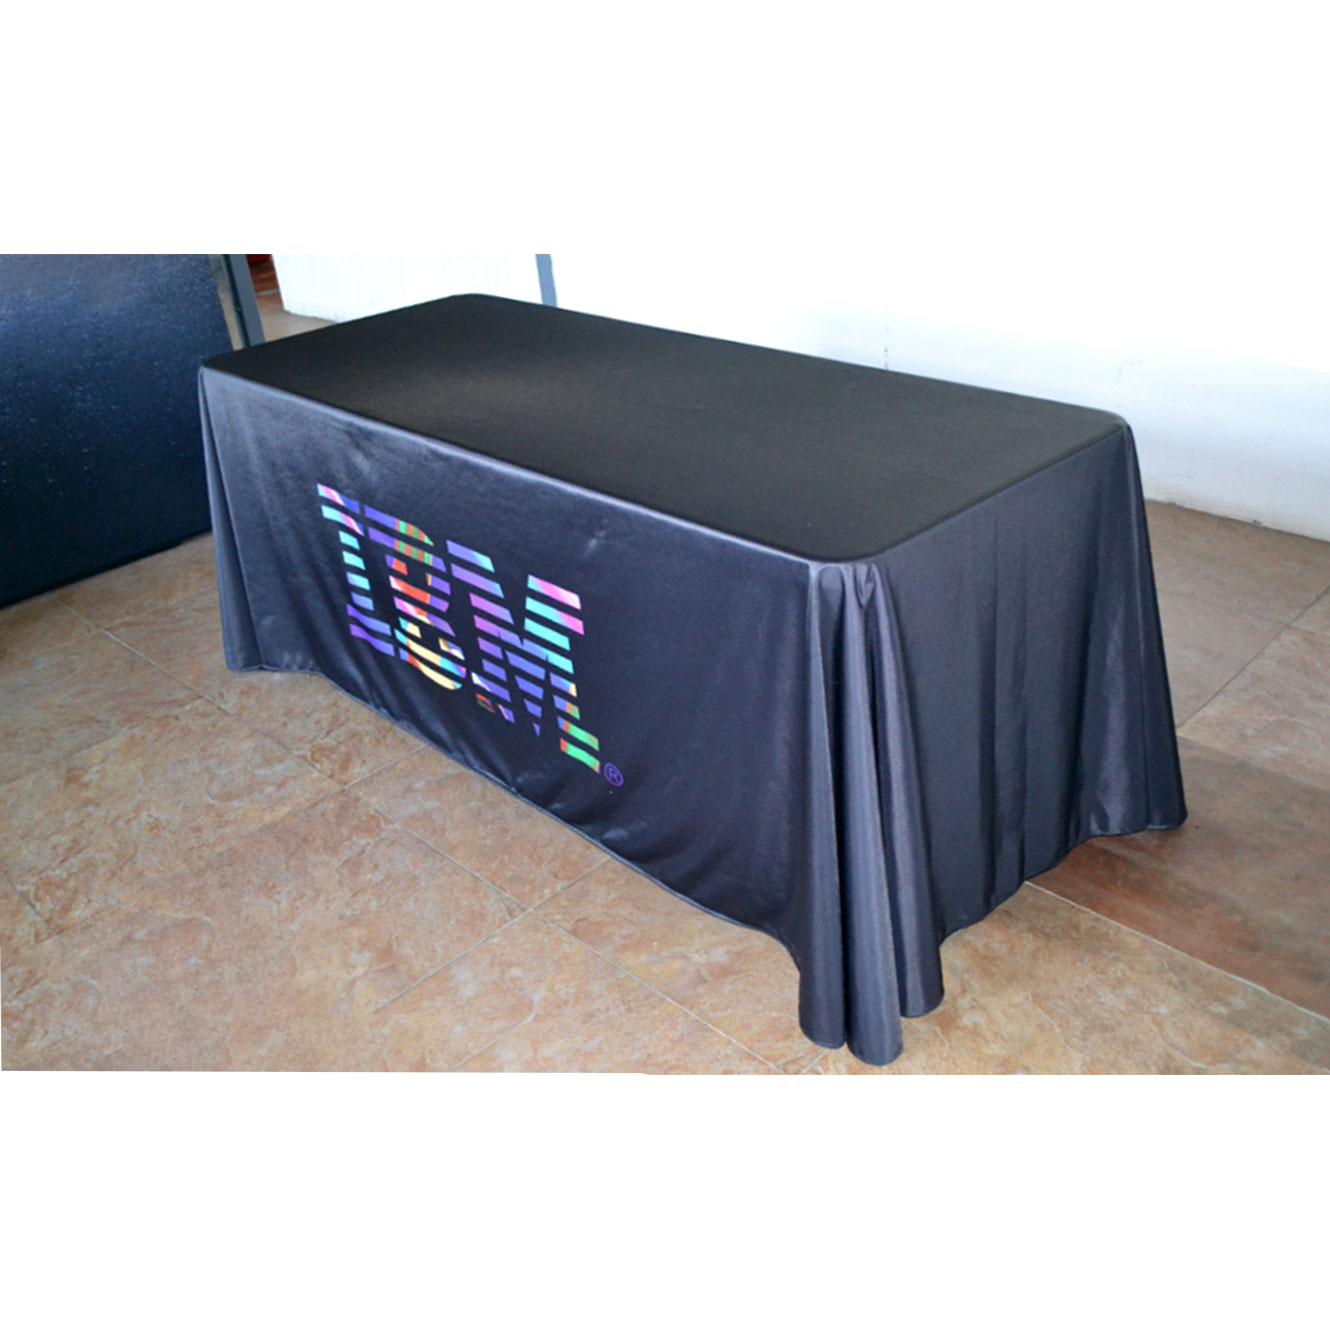 https://bigbanner.com.au/wp-content/uploads/2020/01/6ft-8ft-1-Sided-Deluxe-Printed-Fitted-Table-Throws-Covers-5.jpg